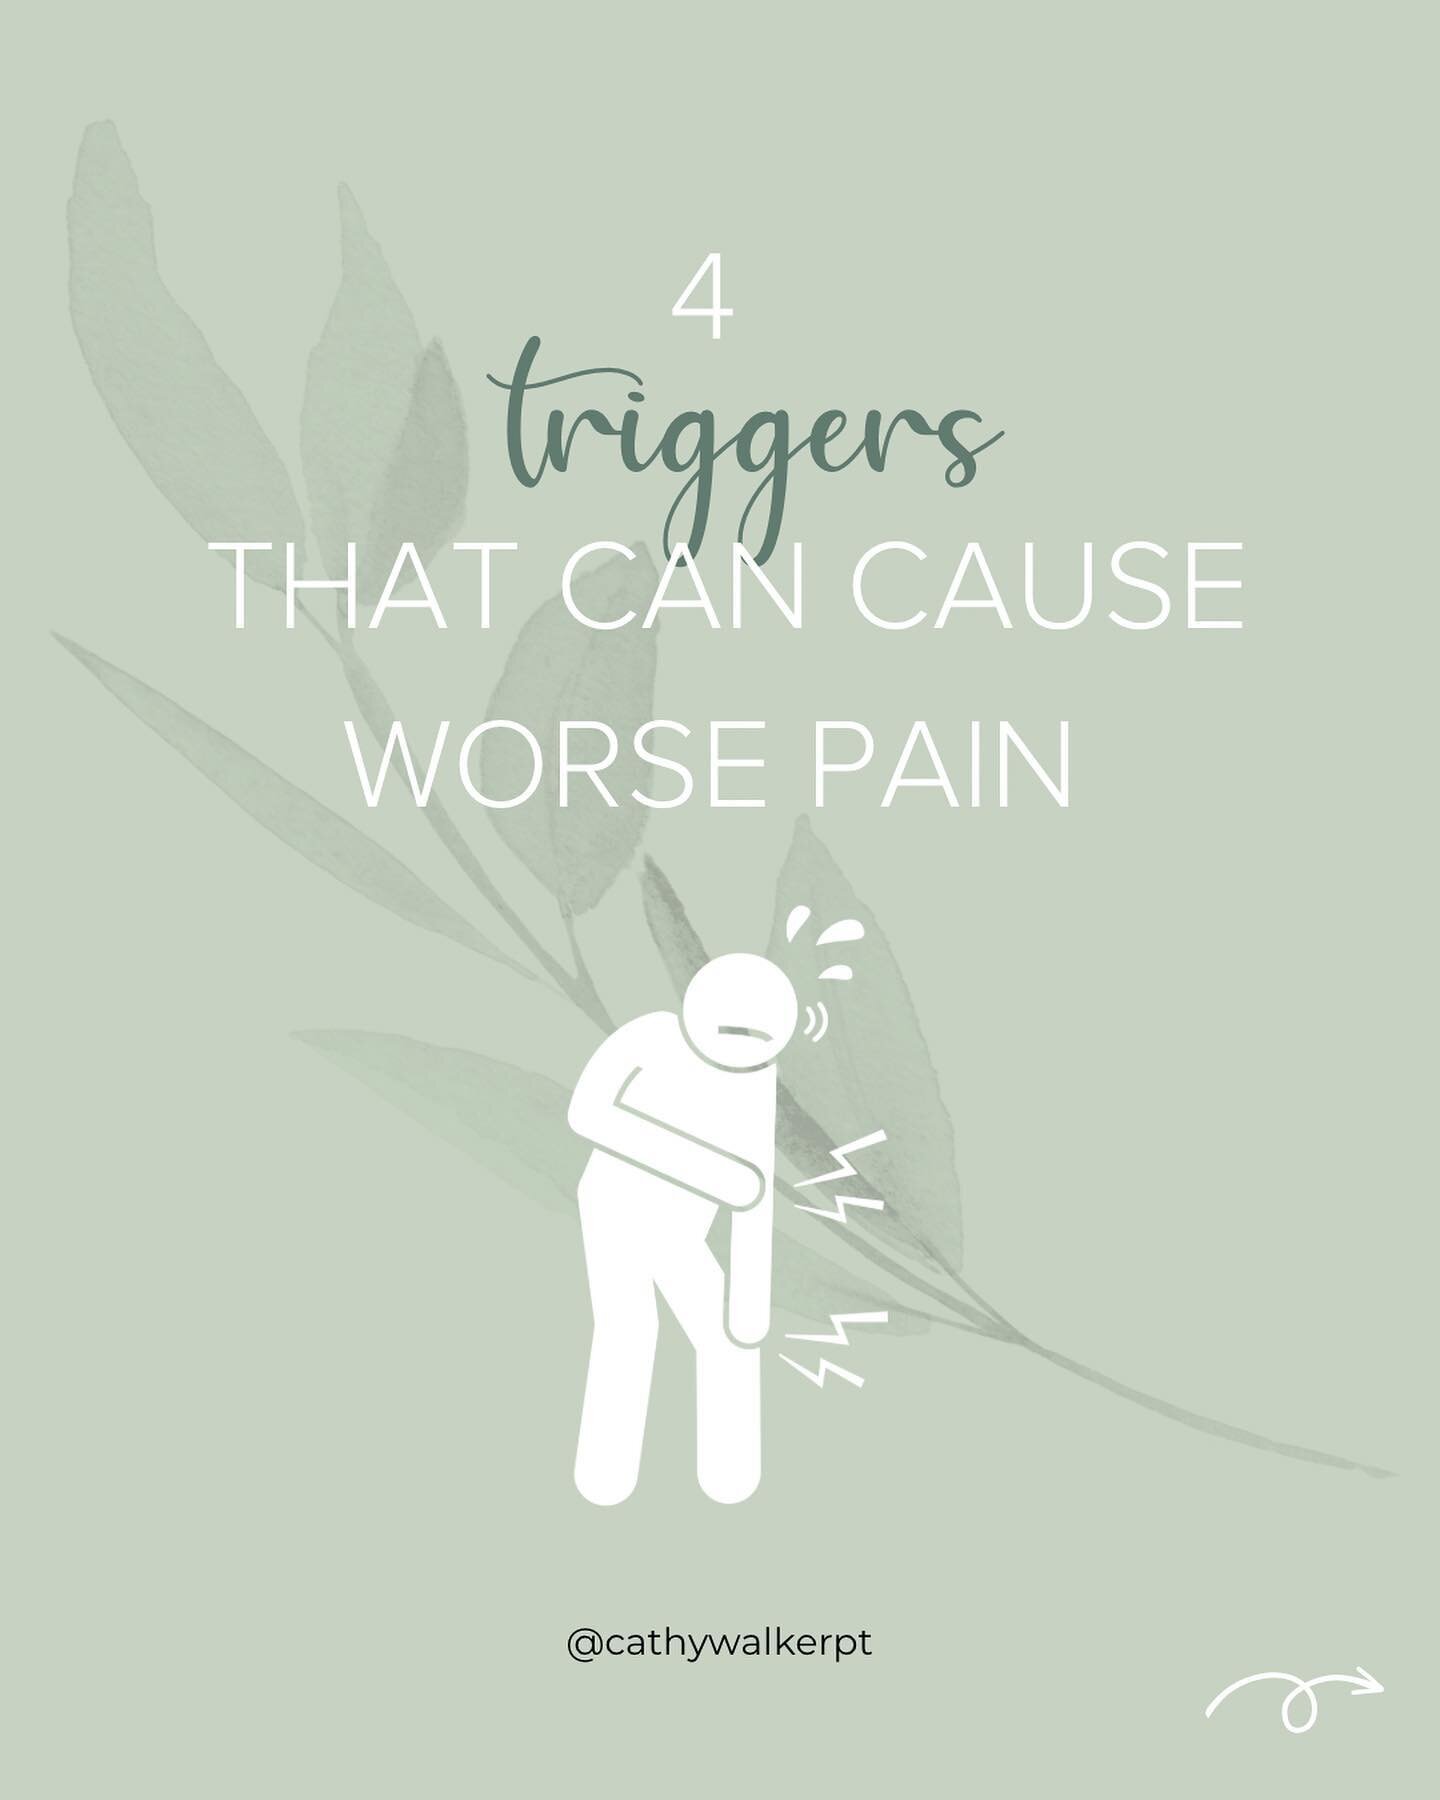 4 triggers that could contribute to your pain with hypermobility.  😖 stress &amp; emotions
😖 food reactions
😖 illness or infections
😖 heat or extreme weather

Pain does not just come from tissue damage. It is actually a signal from the brain that